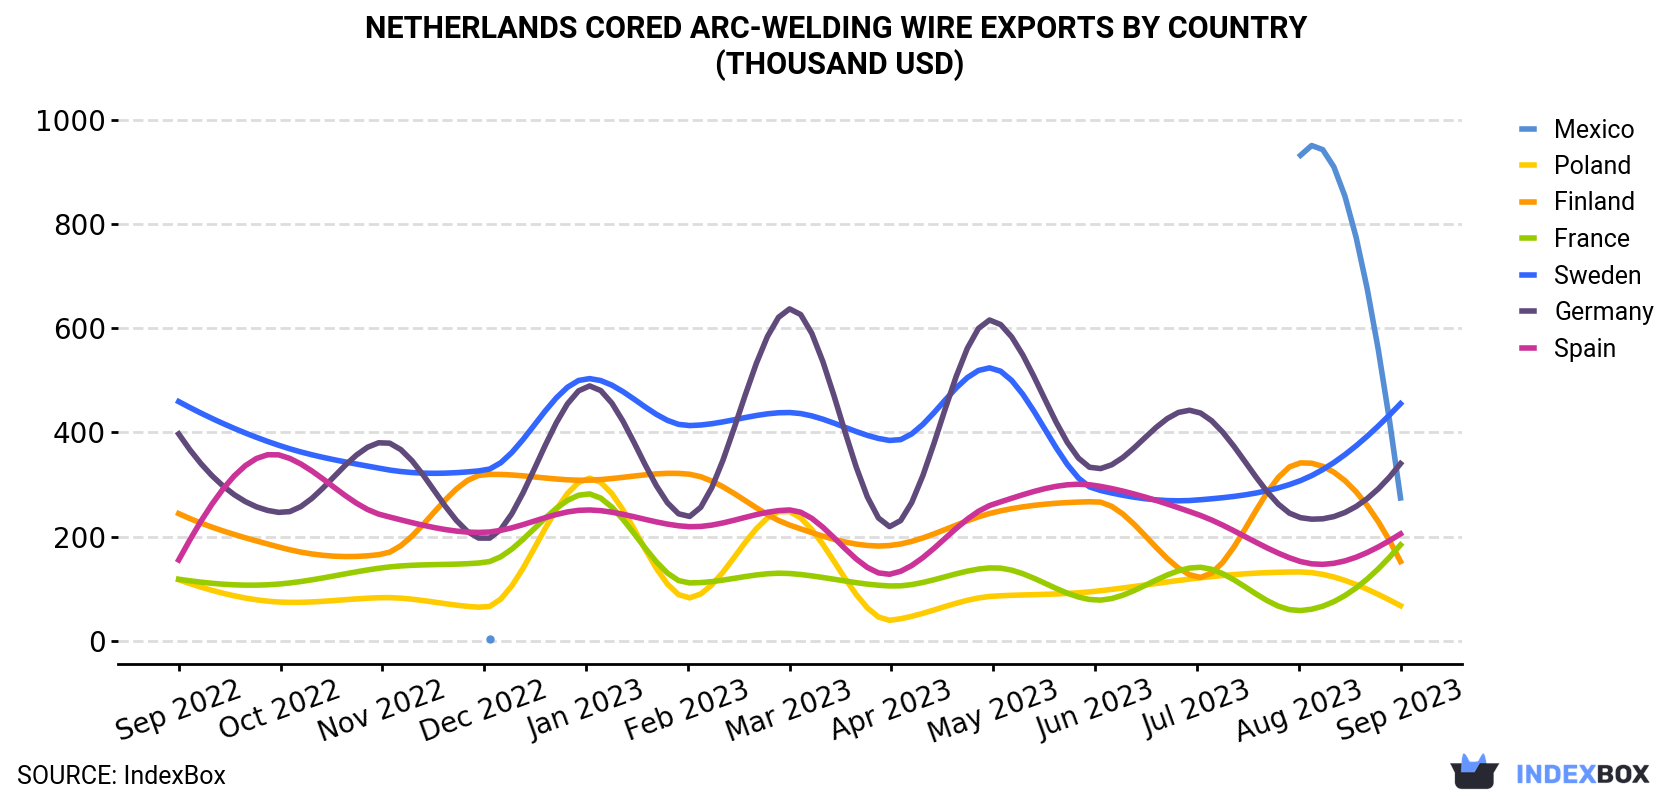 Netherlands Cored Arc-Welding Wire Exports By Country (Thousand USD)